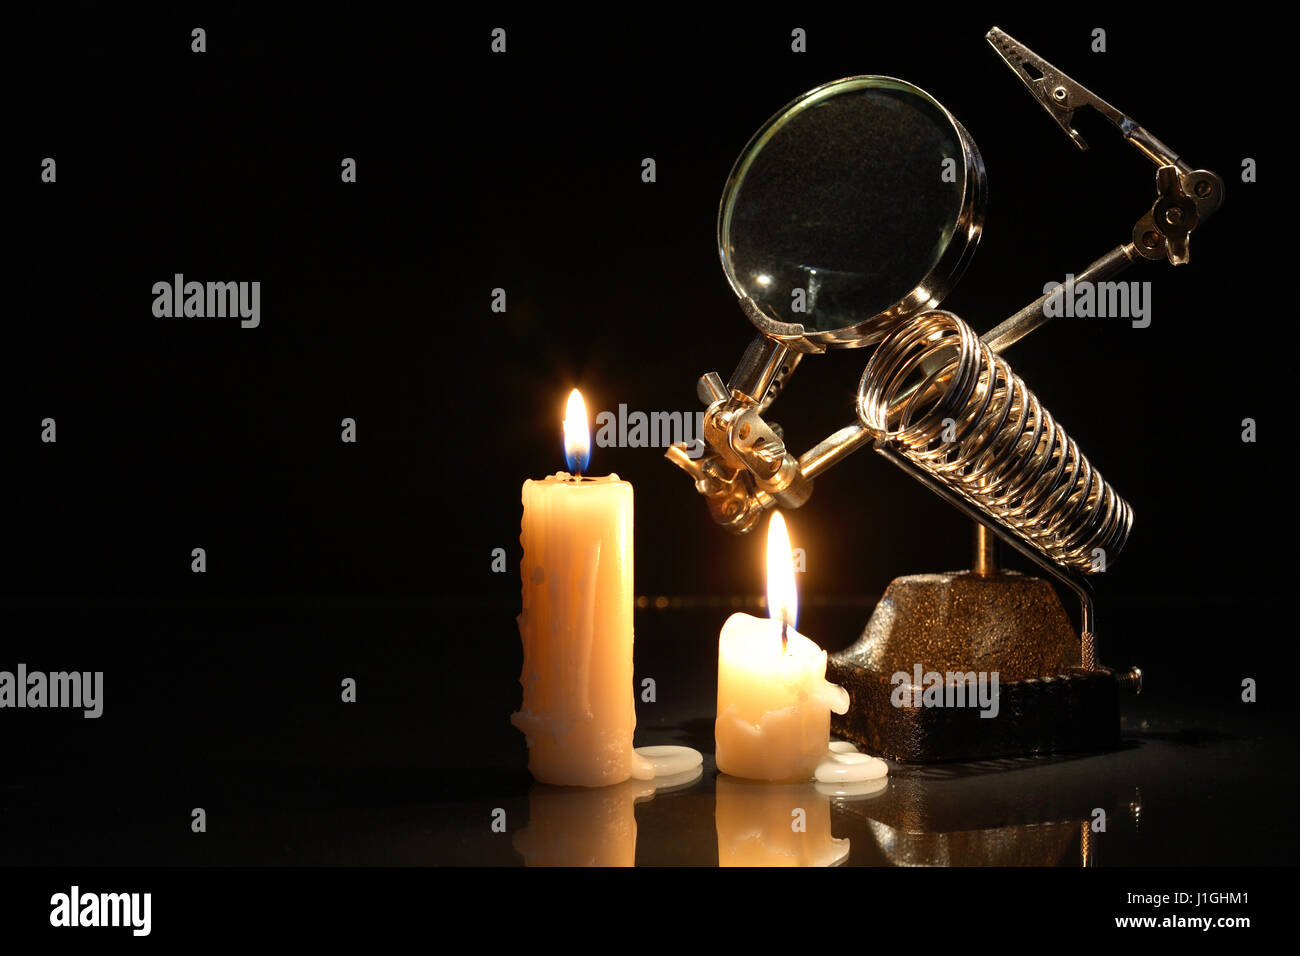 Retro laboratory equipment with magnifying glass near lighting candles on dark background Stock Photo